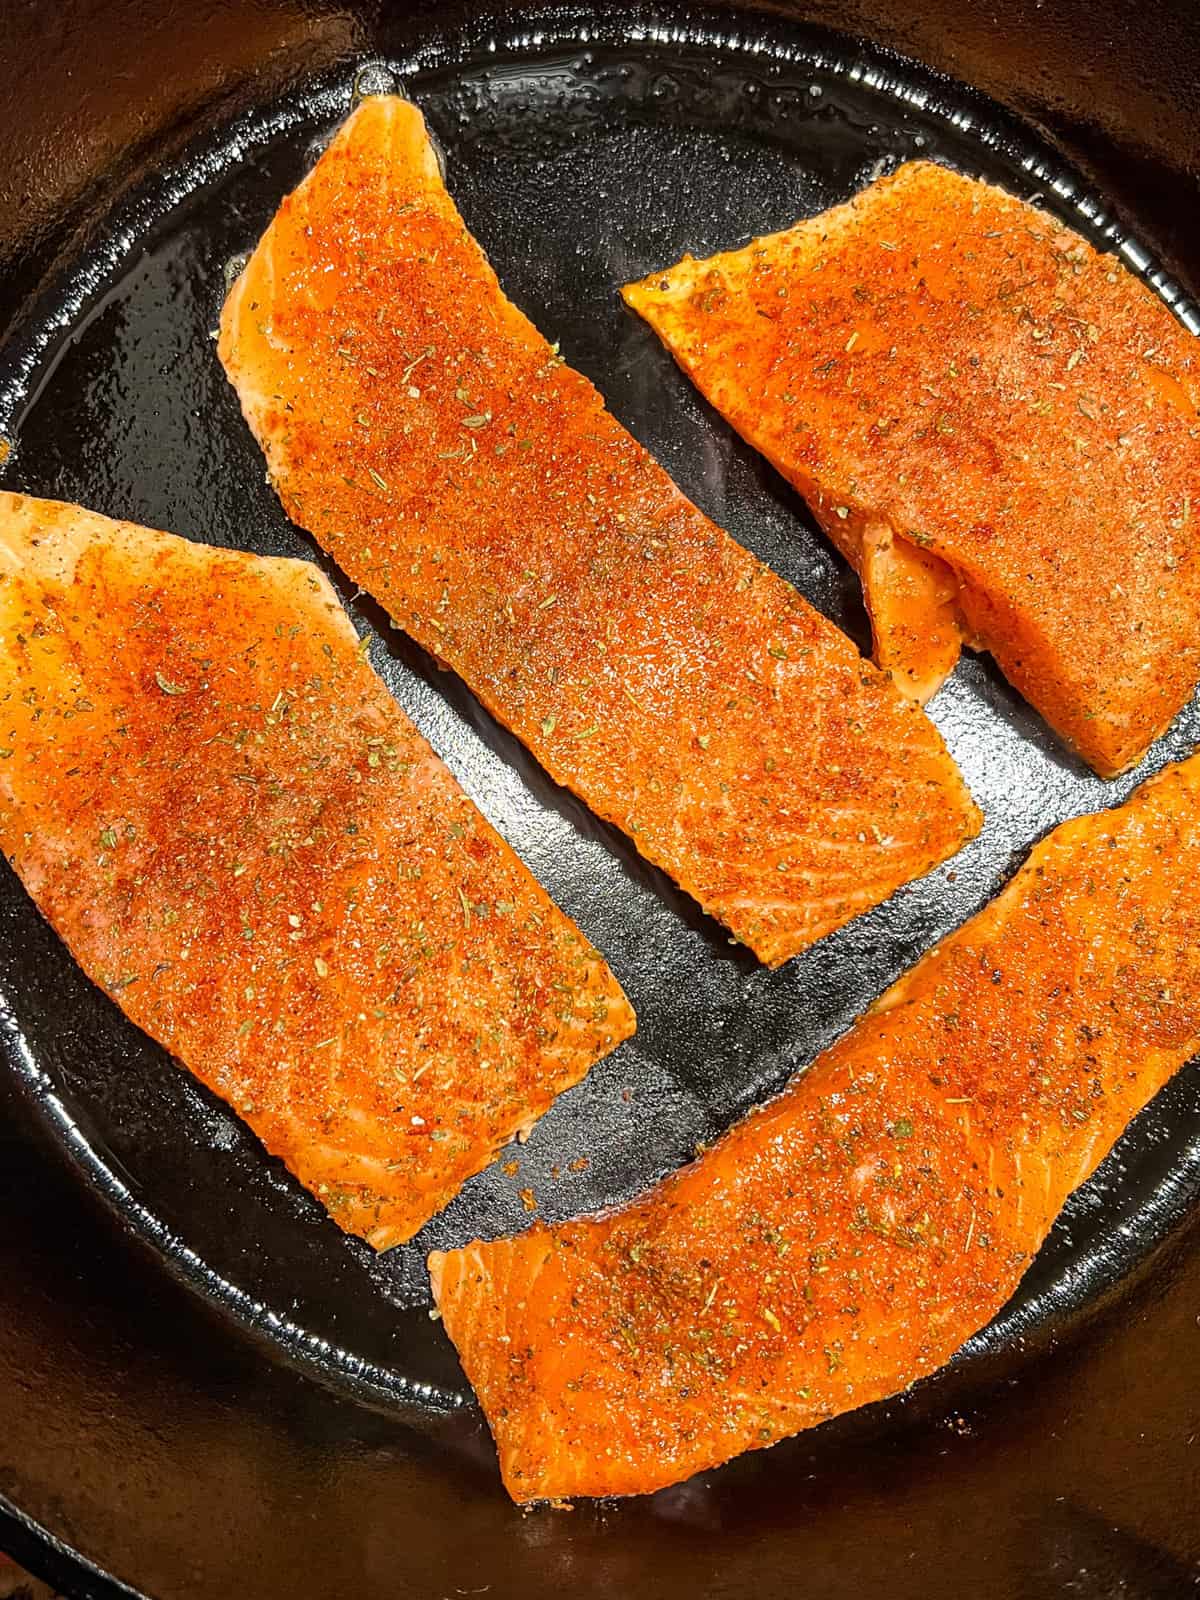 salmon cooking in a skillet